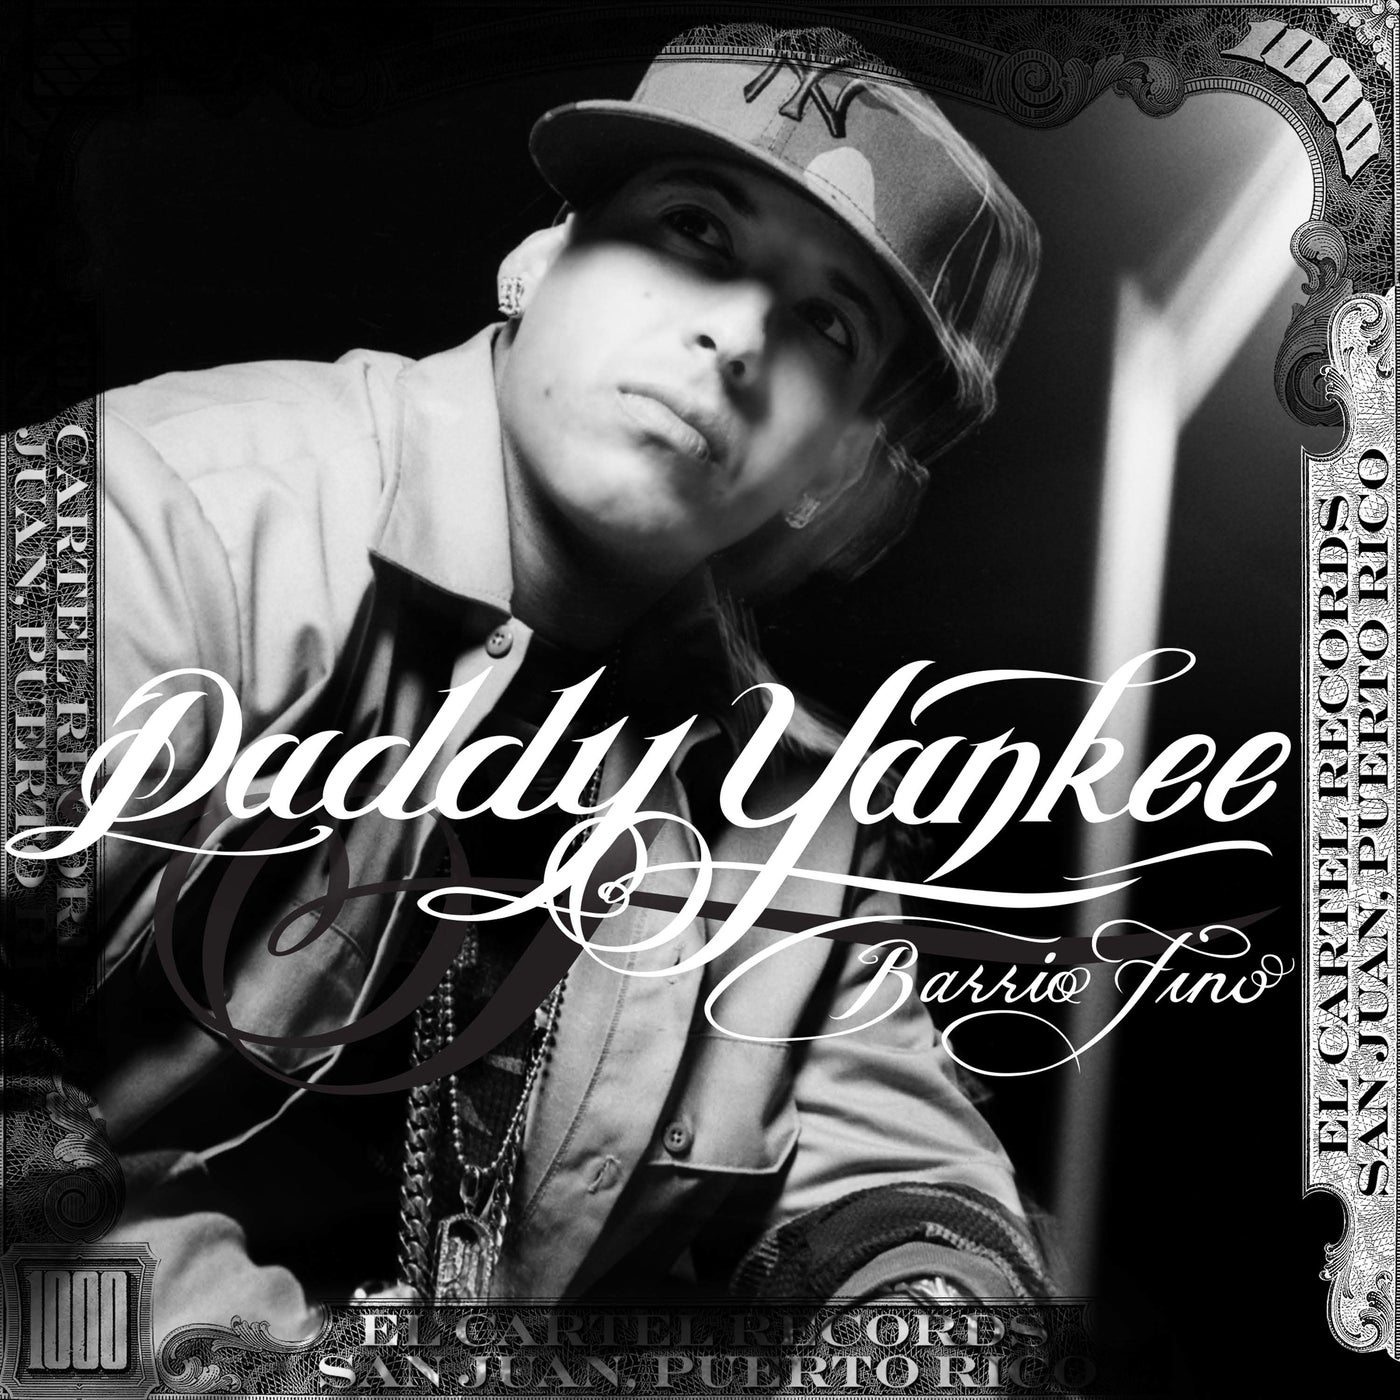 Tu Príncipe by Daddy Yankee and Zion & Lennox on Beatsource